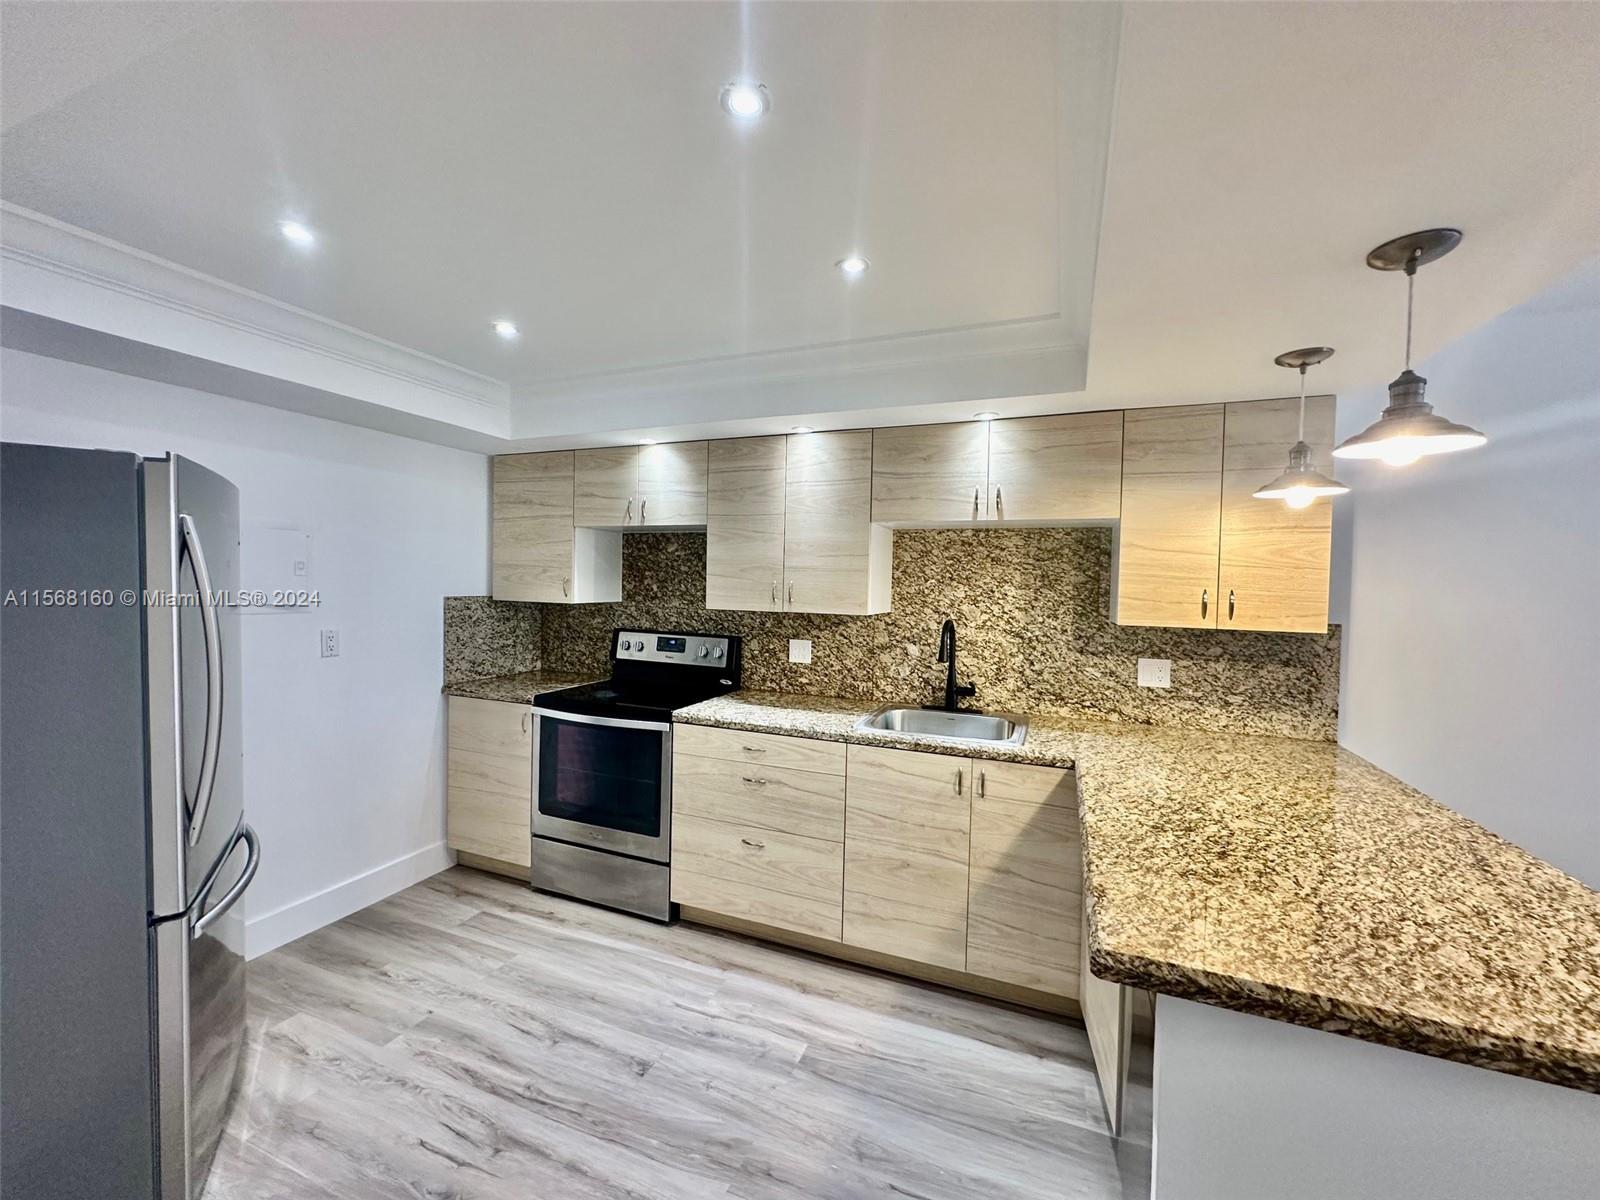 a large kitchen with stainless steel appliances kitchen island a large counter top and wooden floors